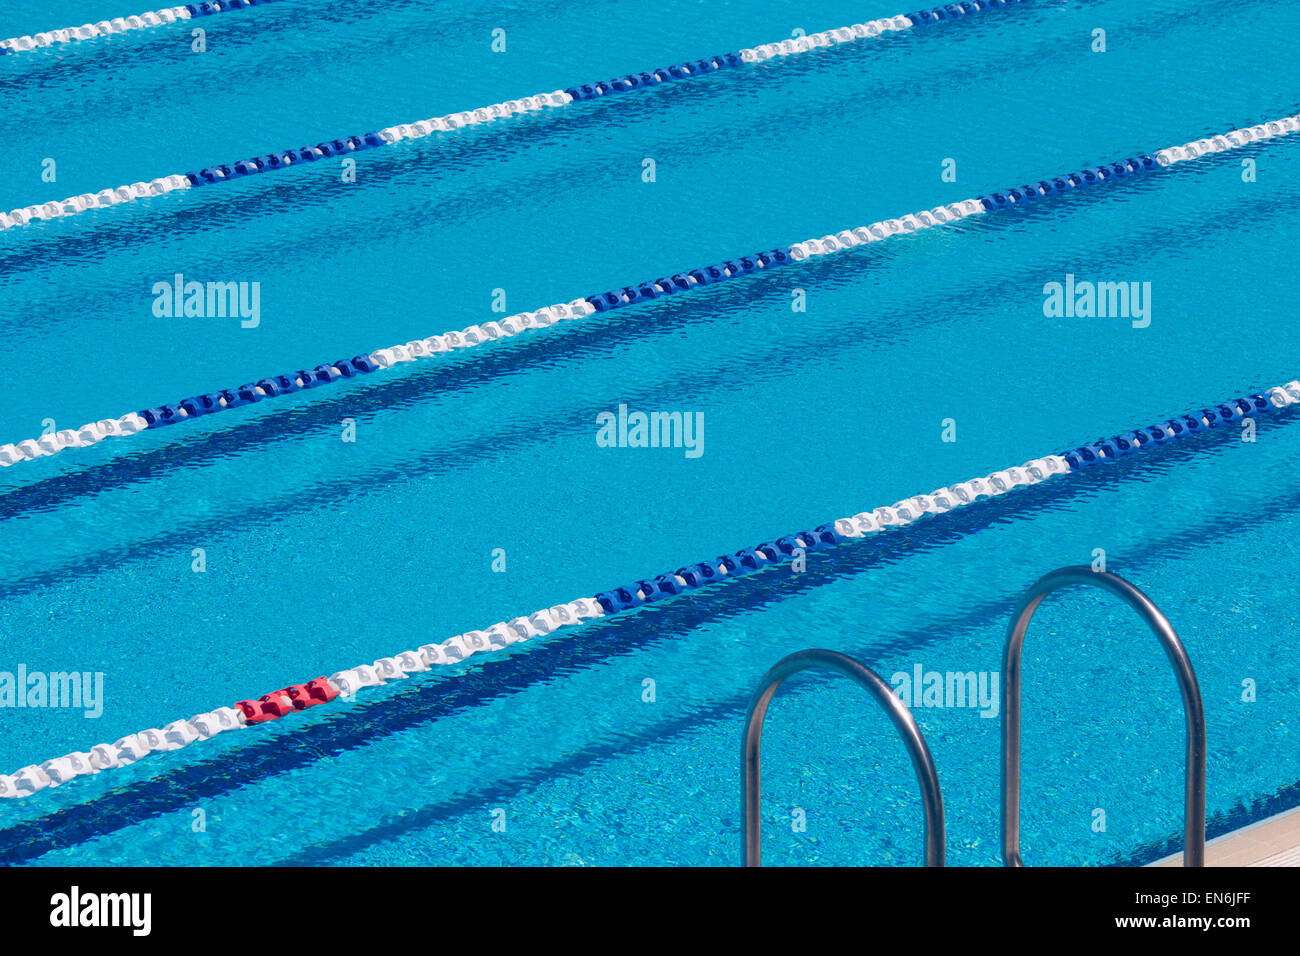 Andrew 'Boy' Charlton Swimming Pool detail of lane markers and poolside rails Sydney New South Wales NSW Australia Stock Photo